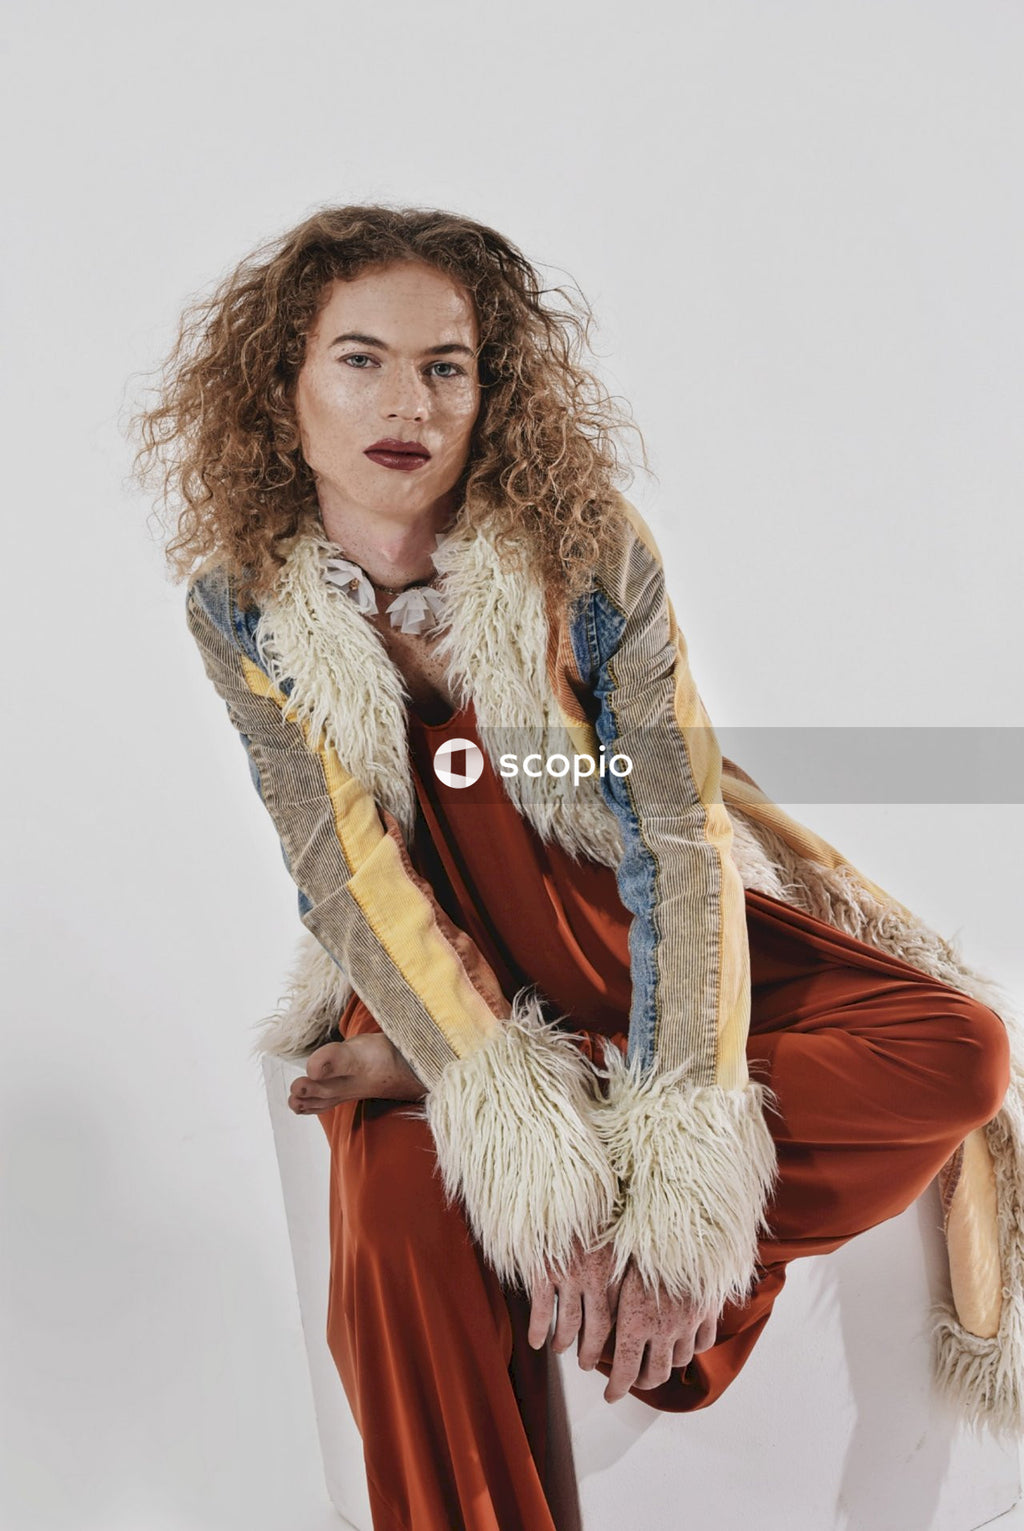 Portrait of trans woman wearing fur and make-up against light background